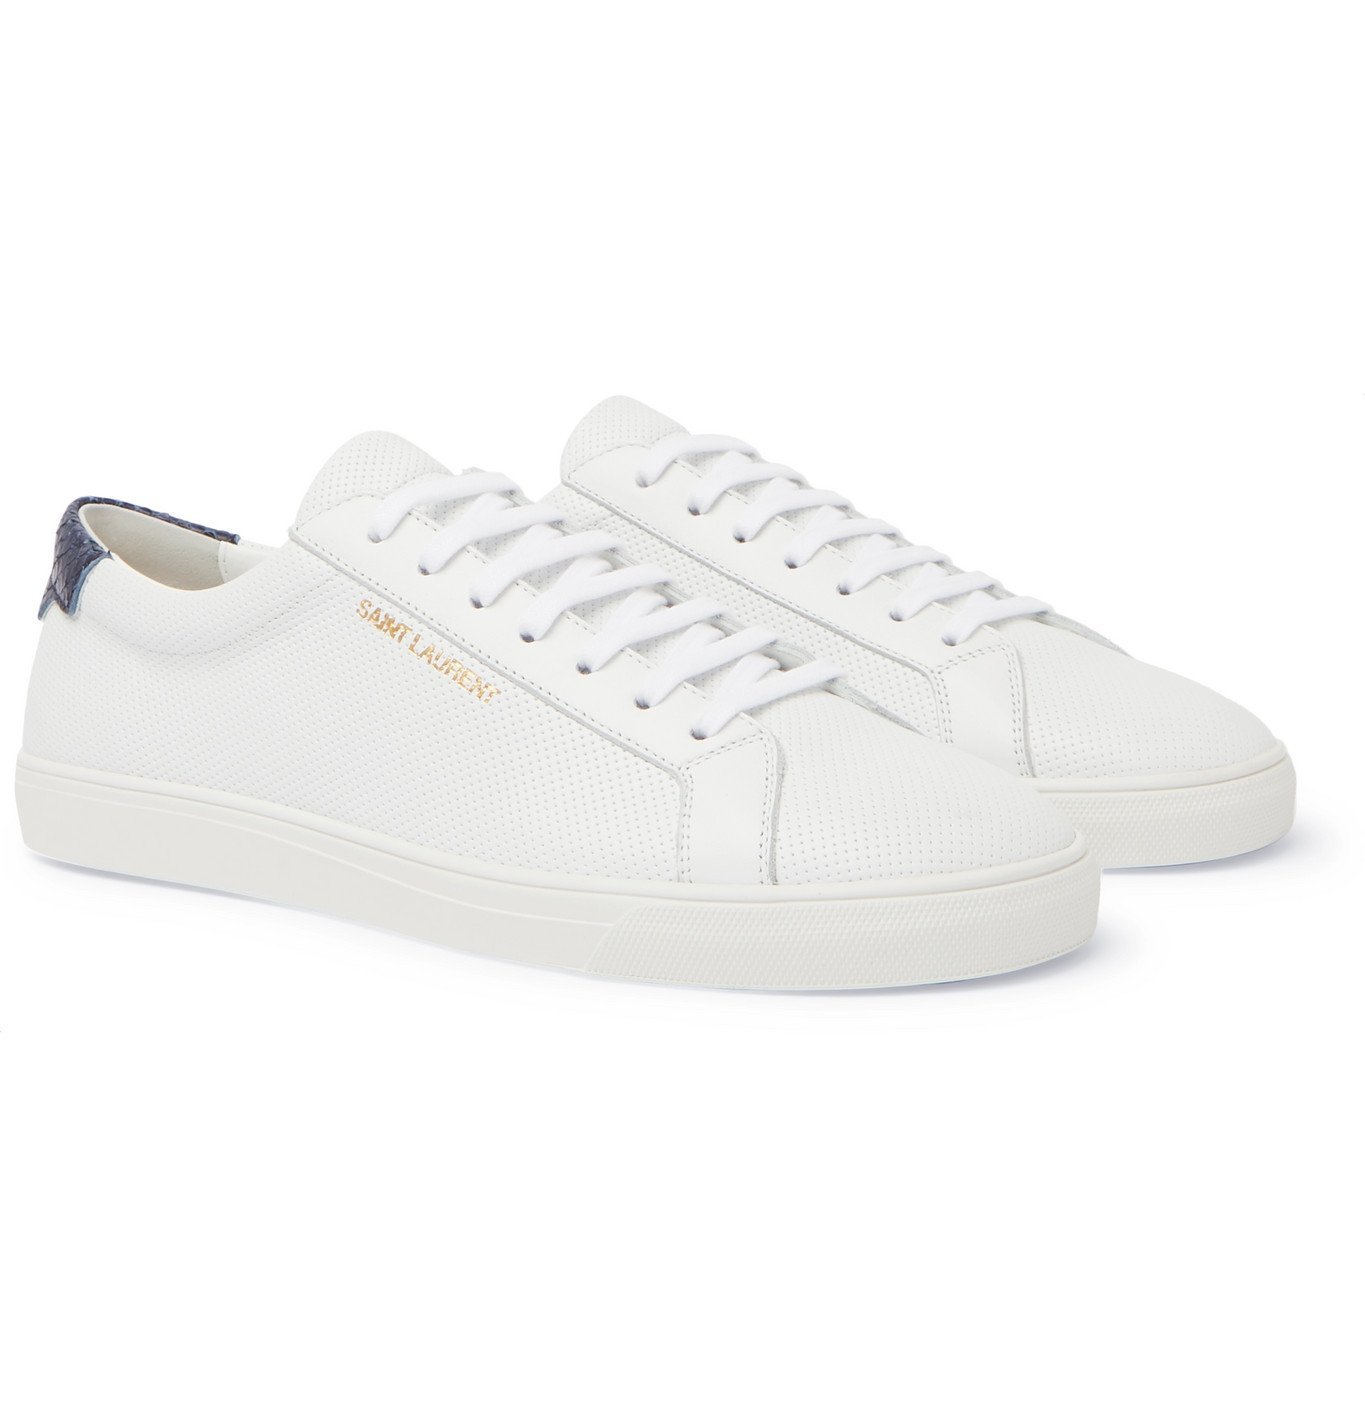 SAINT LAURENT - Andy Snake Effect-Trimmed Perforated Leather Sneakers ...